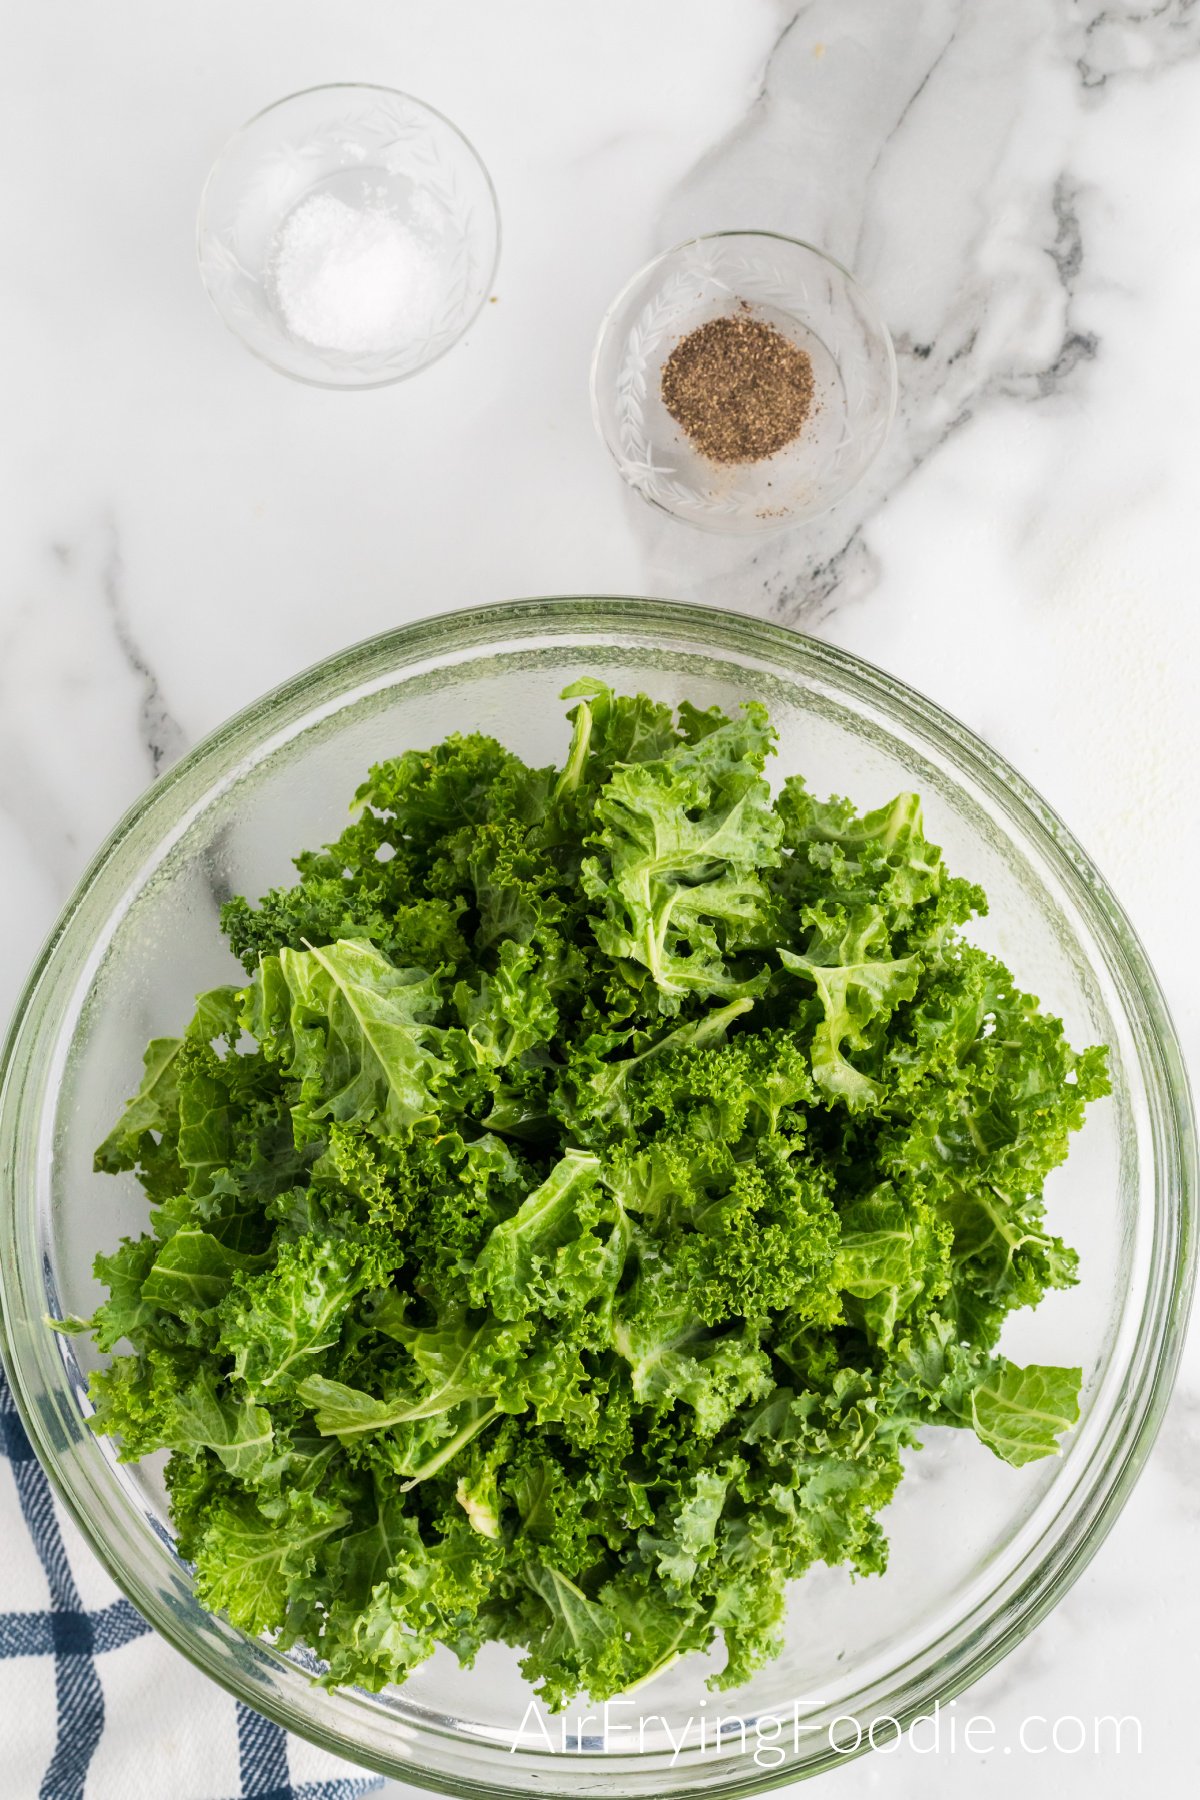 Picture of the kale that has been transferred to a glass bowl. Above the glass bowl of kale are two more glass bowls, one containing salt and the other containing pepper.